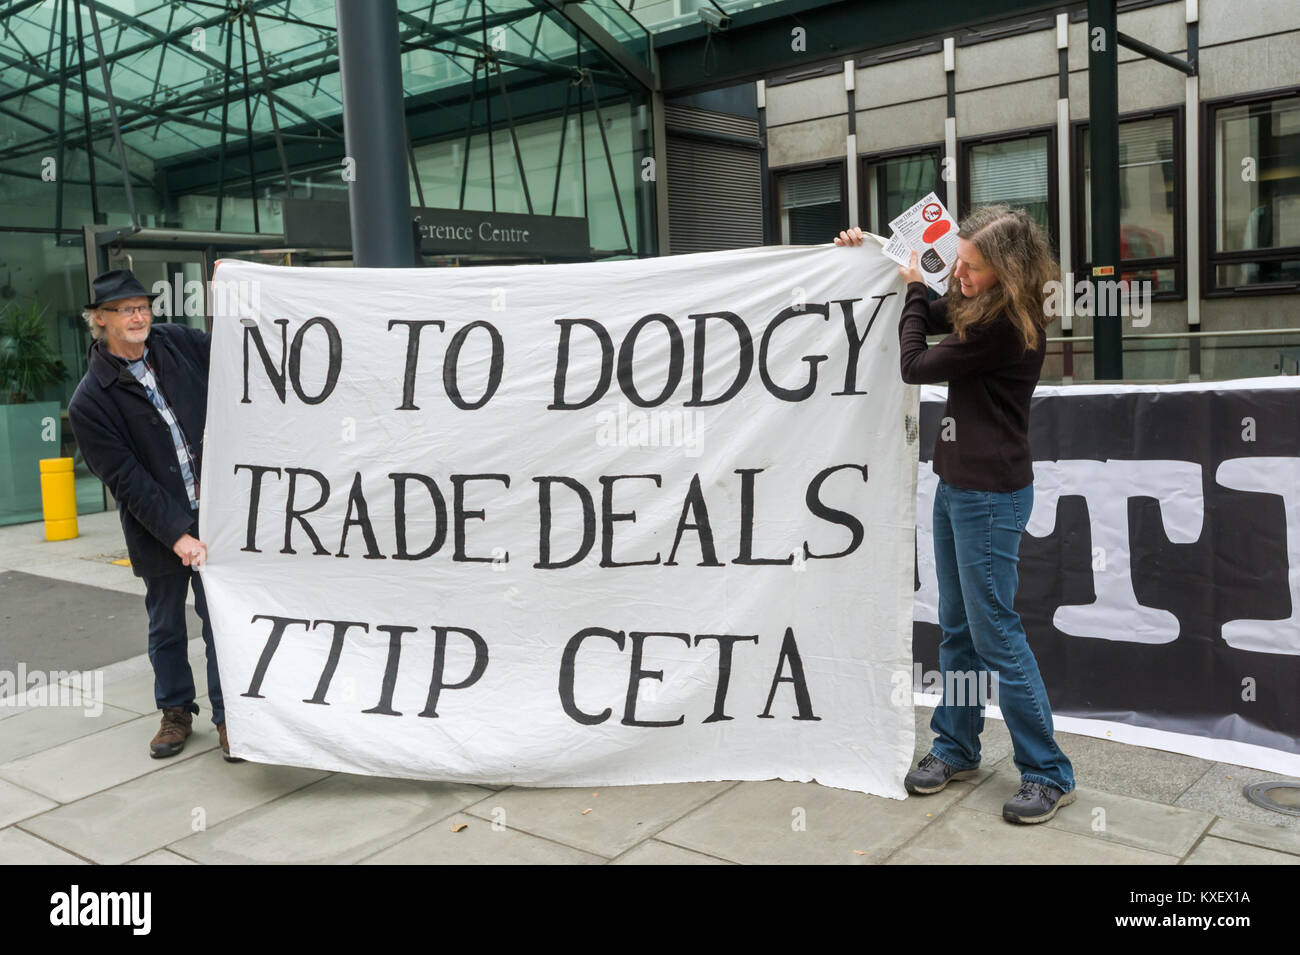 Protesters hold a banner 'No to Dodgy Trade Deals TTIP CETA' outside the Dept fo Busines Innovations & Skills. . Over 3 million have signed a petition against the secret trade deal would give corporate profits priority over democratic government decisions. Stock Photo